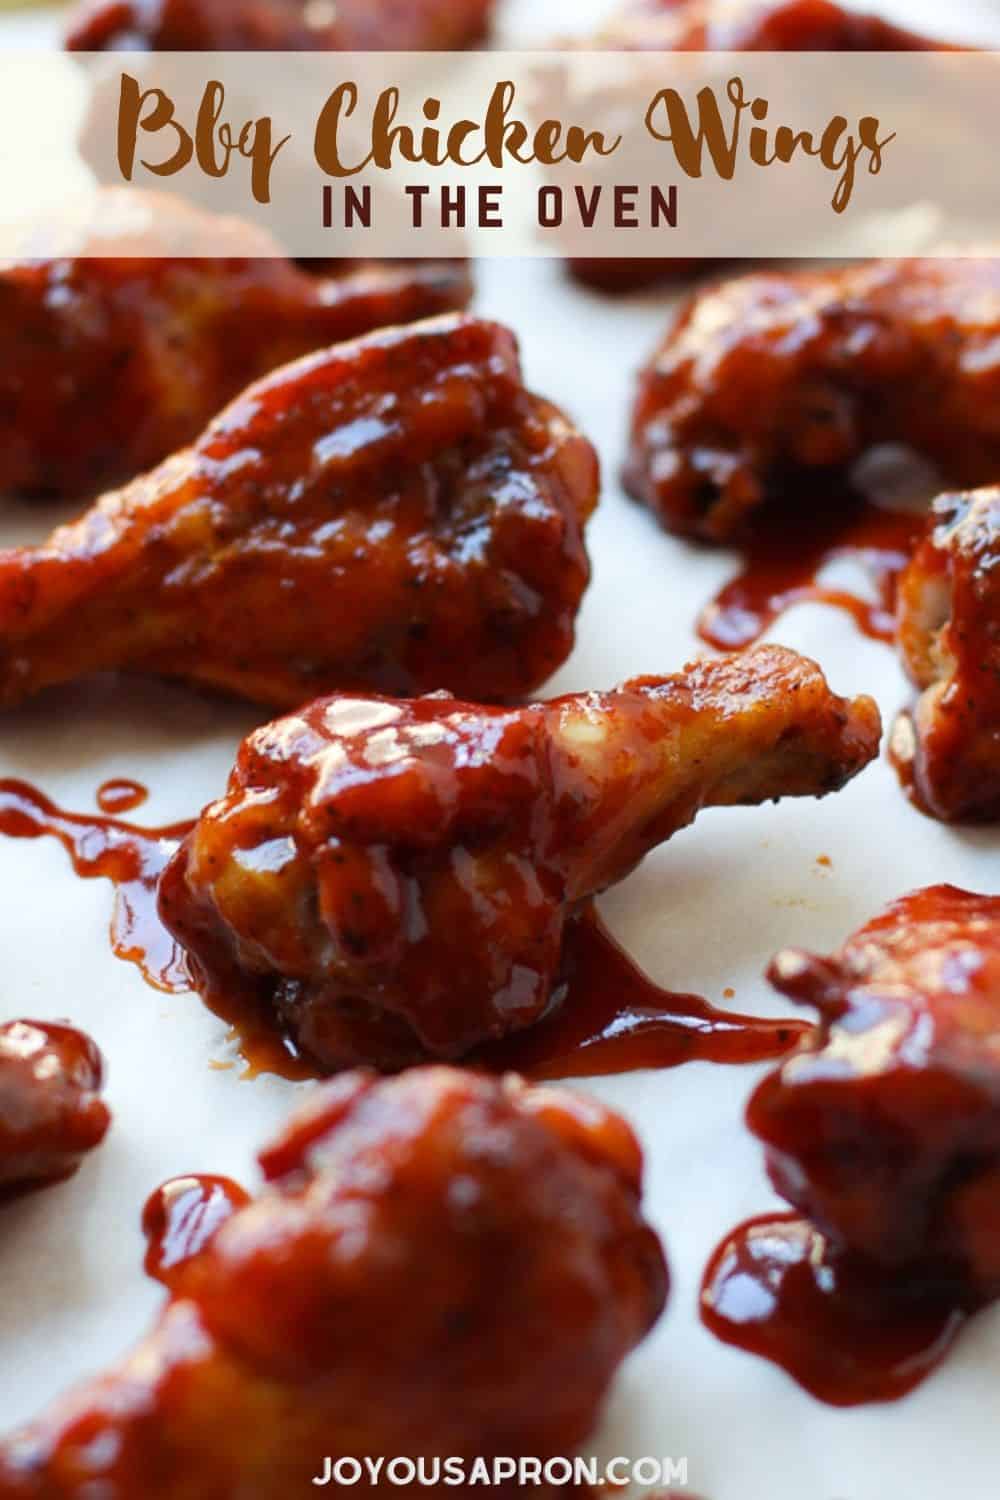 BBQ Baked Chicken Wings - these chicken wings are easy to make, baked AND crispy! Then smothered with BBQ sauce. The perfect appetizer or main course for parties, game day, any day! via @joyousapron